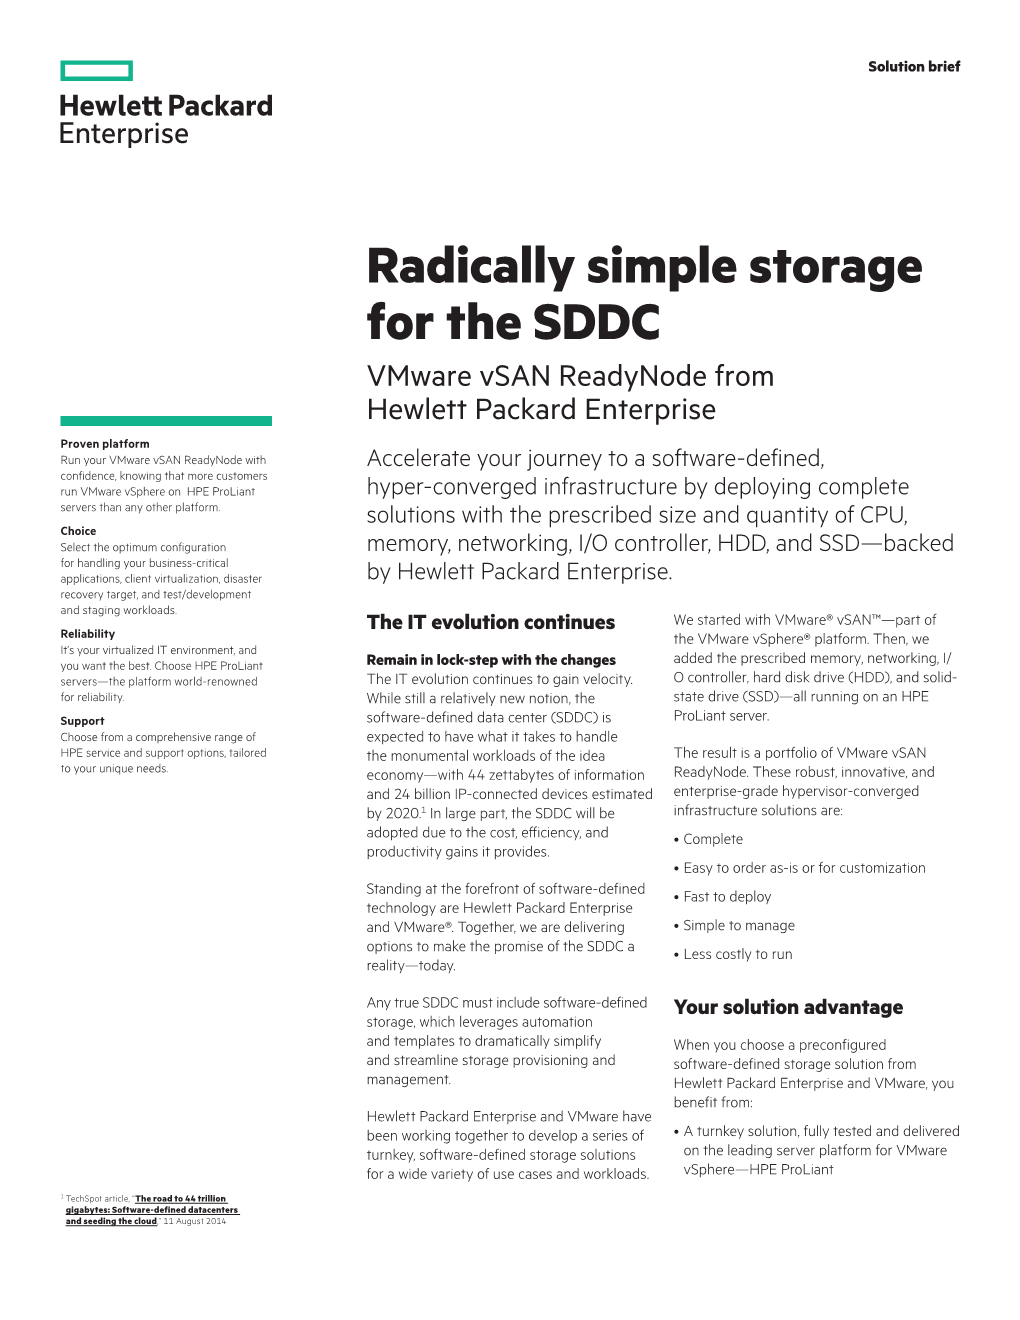 Radically Simple Storage for the SDDC: Vmware Virtual SAN Ready